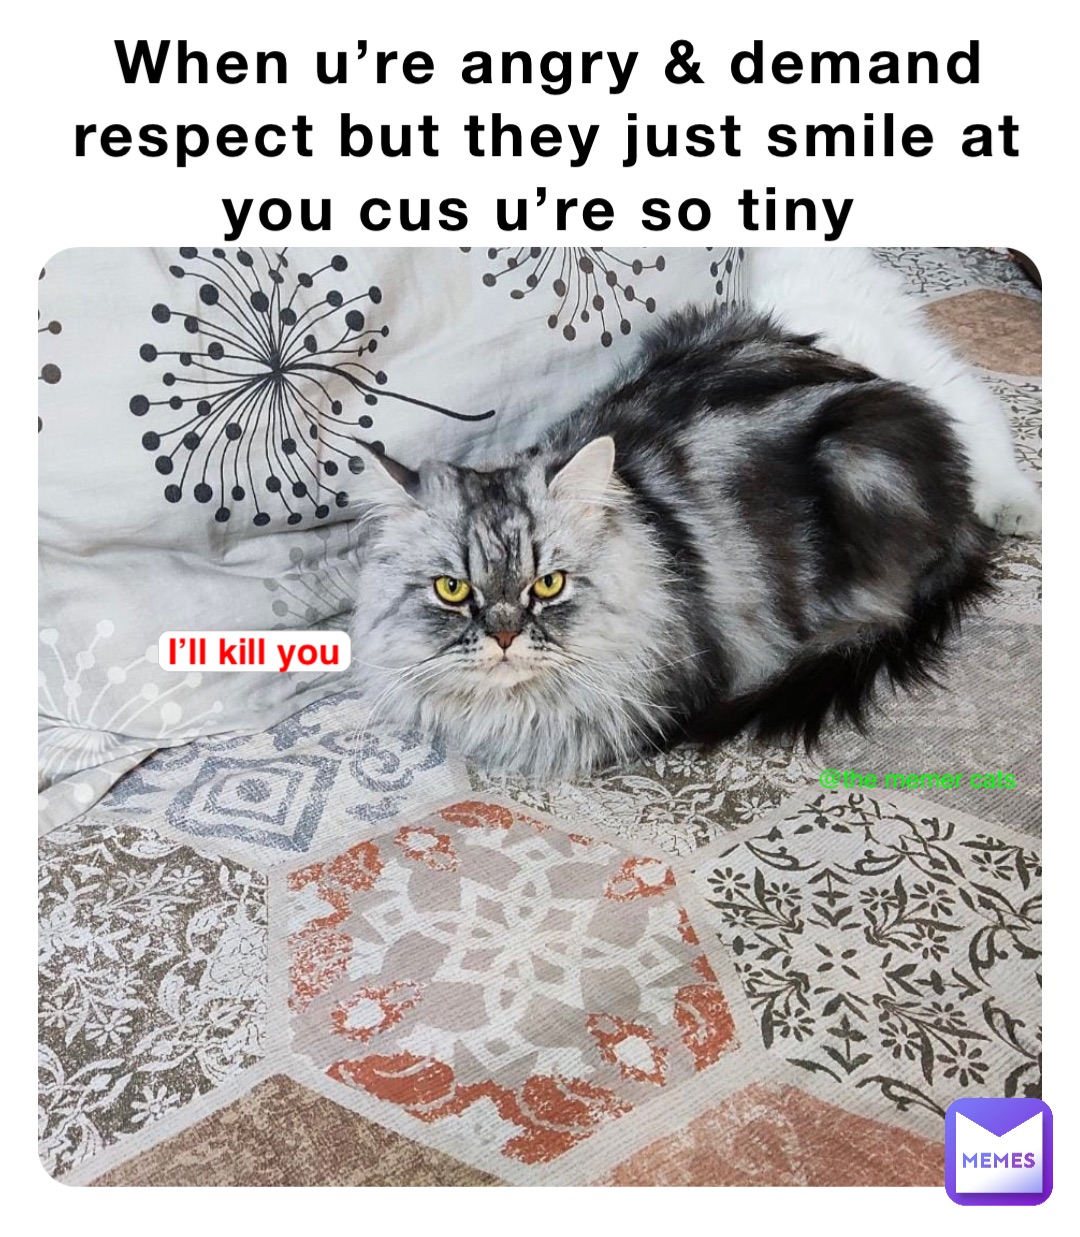 When u’re angry & demand respect but they just smile at you cus u’re so tiny I’ll kill you @the memer cats